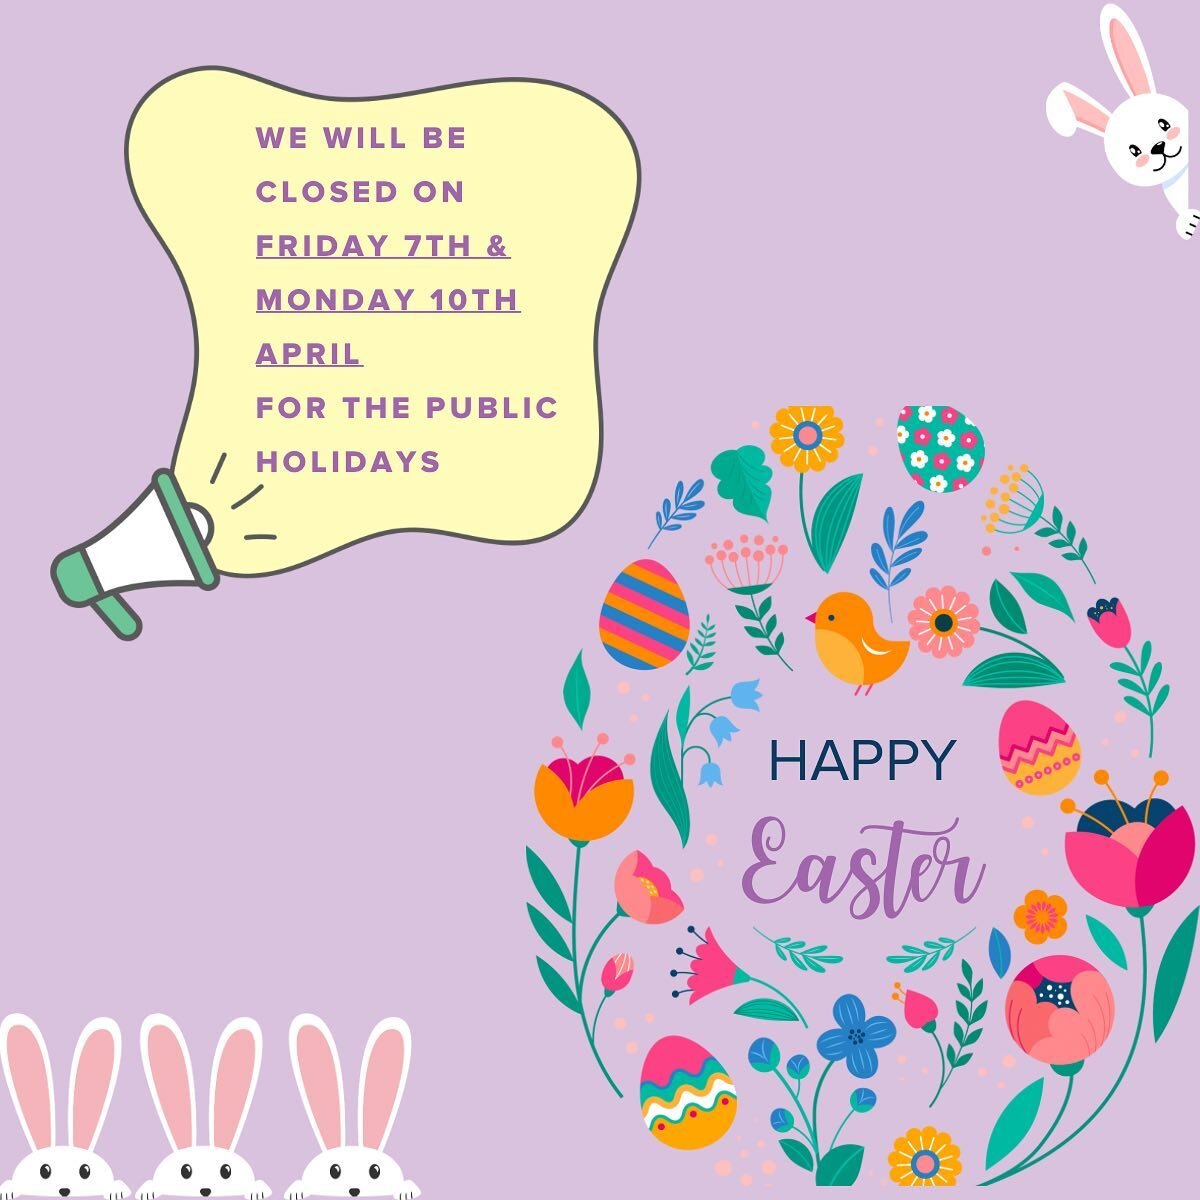 Happy Easter from all of us at Splash 🐰 

We will be closed for the public holidays and look forward to seeing our clients on the 11th of April! 🙂